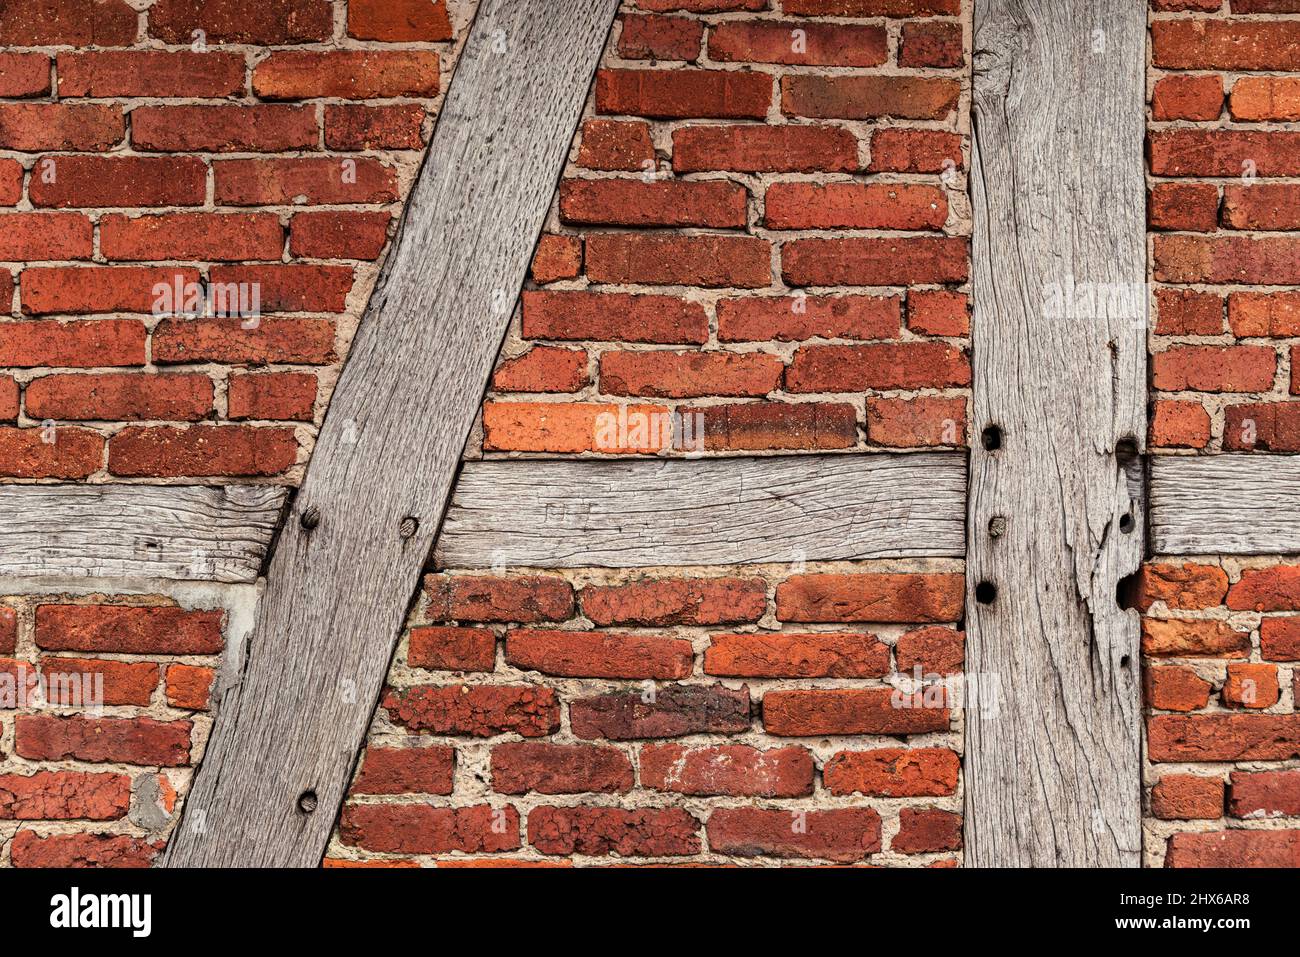 Background texture of an old timber frame wall, consisting of weathered wooden beams and red bakestone bricks, typical for half-timbered architecture Stock Photo